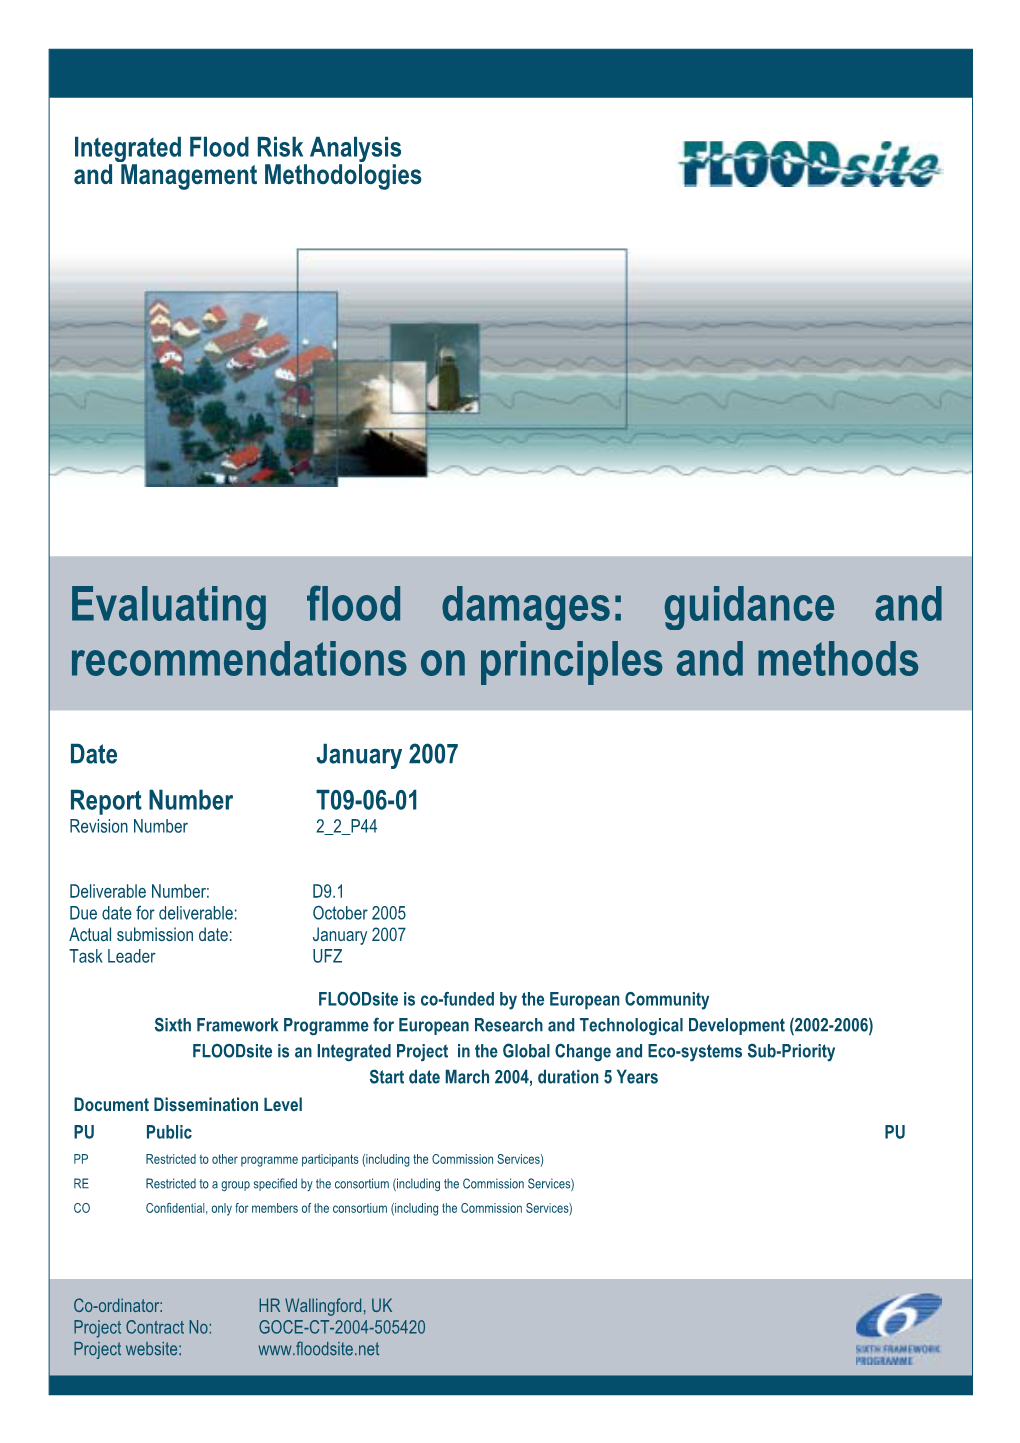 Evaluating Flood Damages: Guidance and Recommendations on Principles and Methods